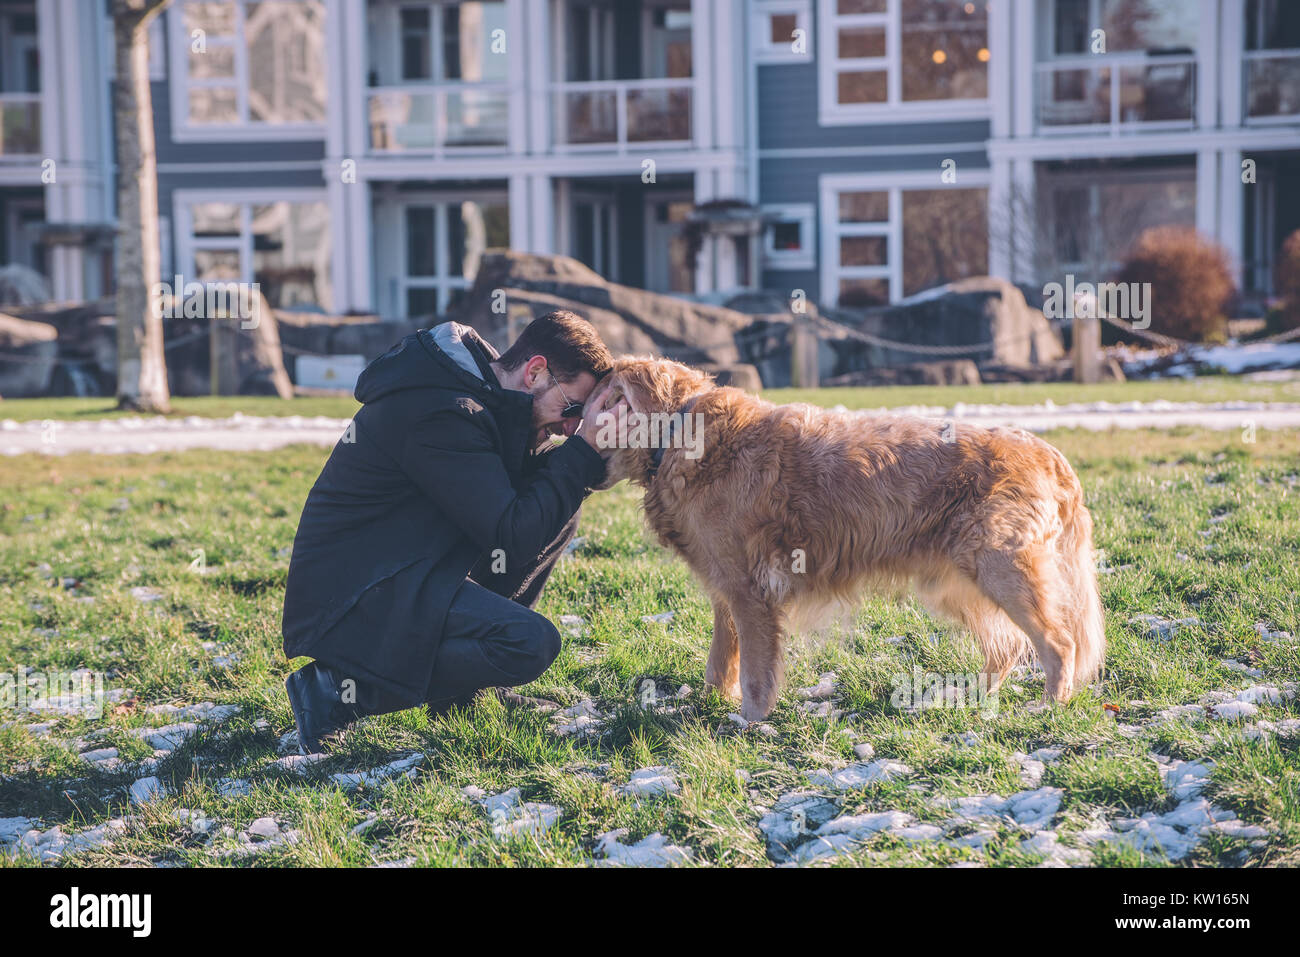 Male playing with golden retriever dog Stock Photo